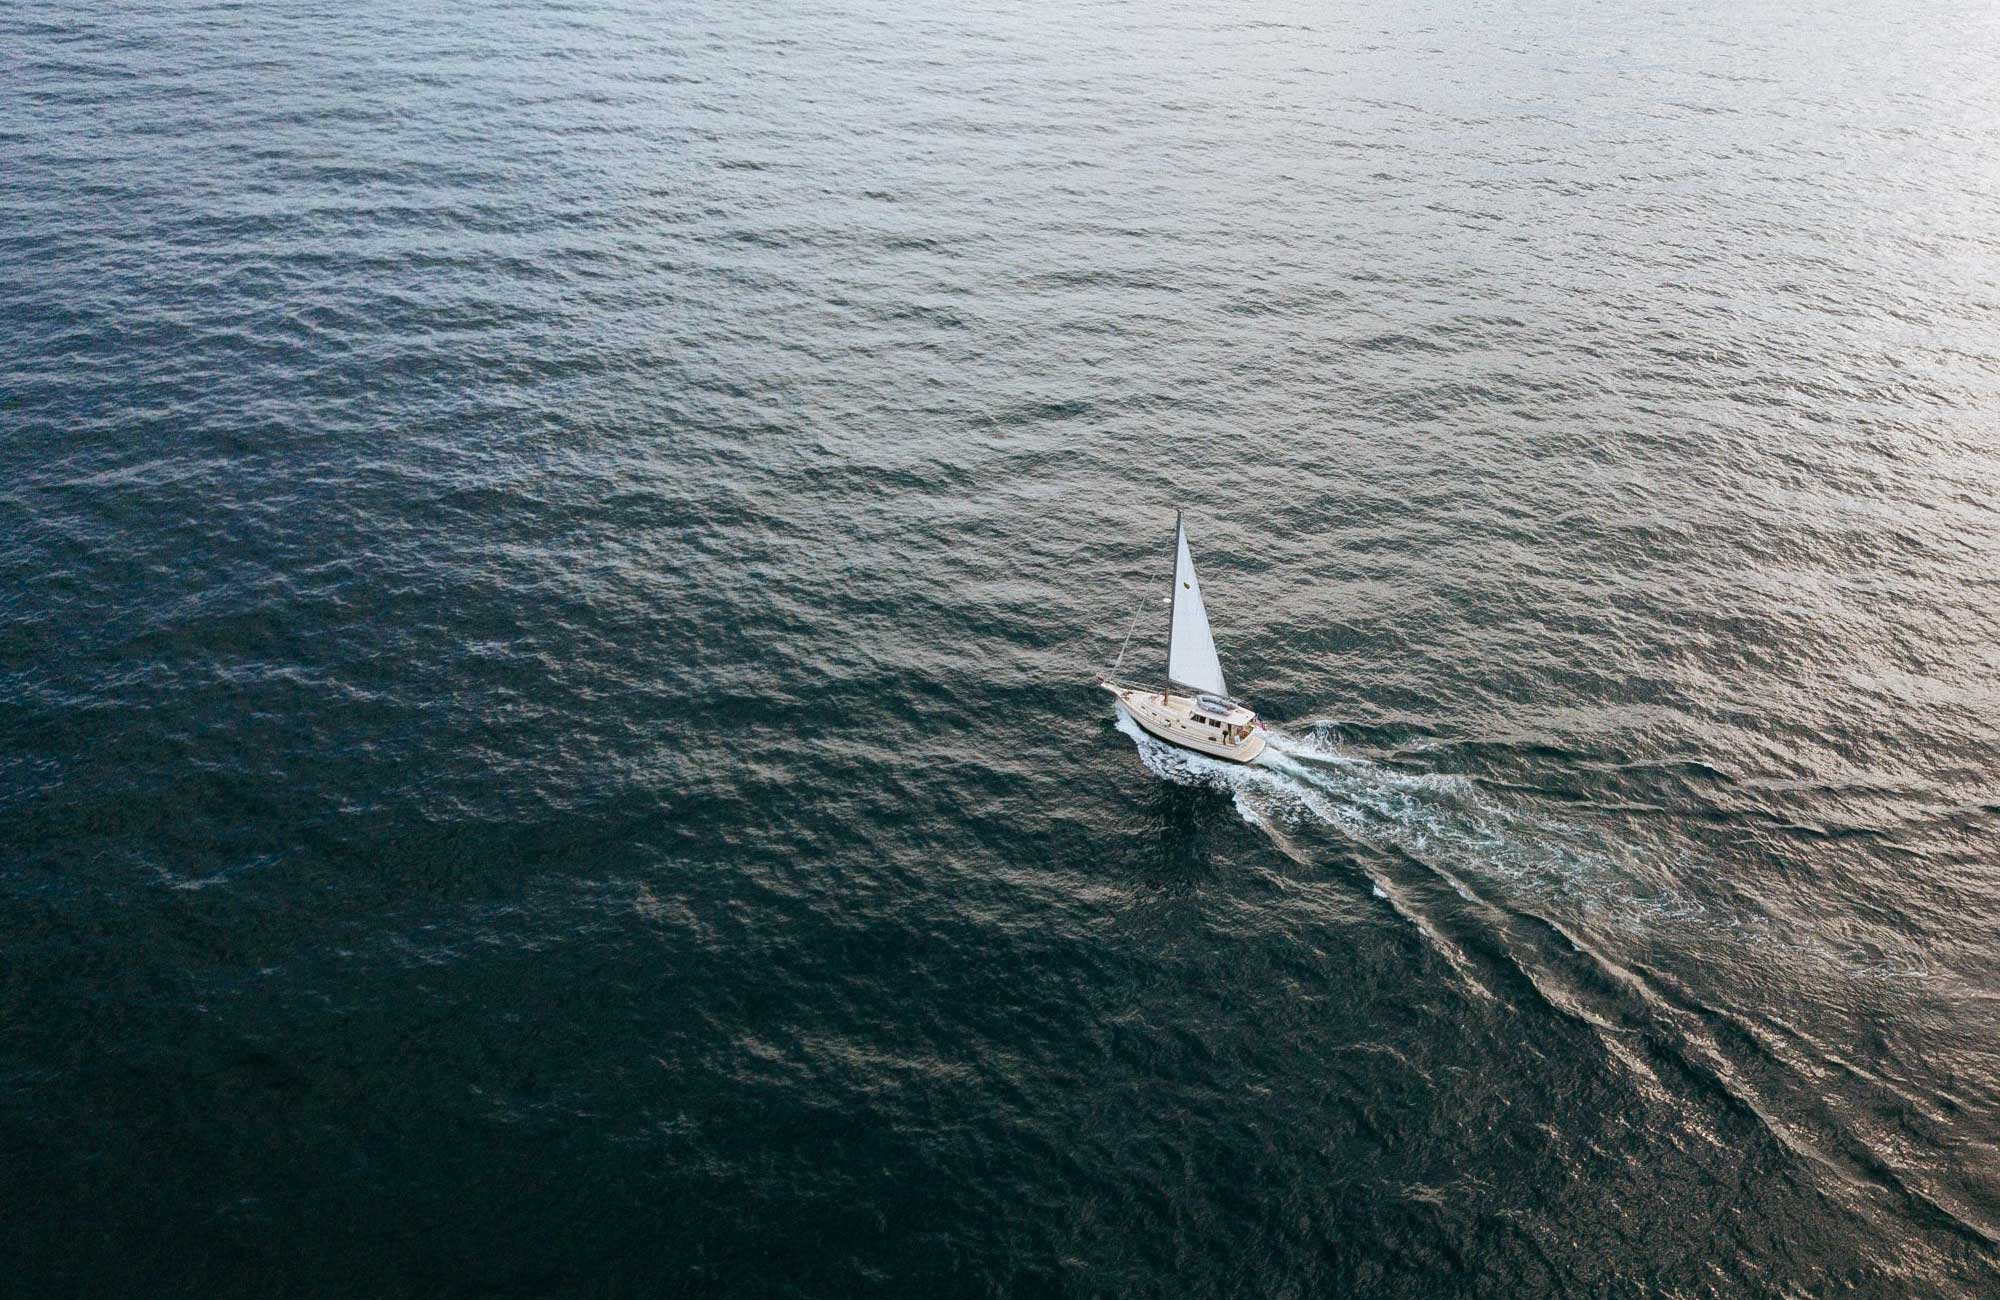 Ariel shot of a sailboat in the lake